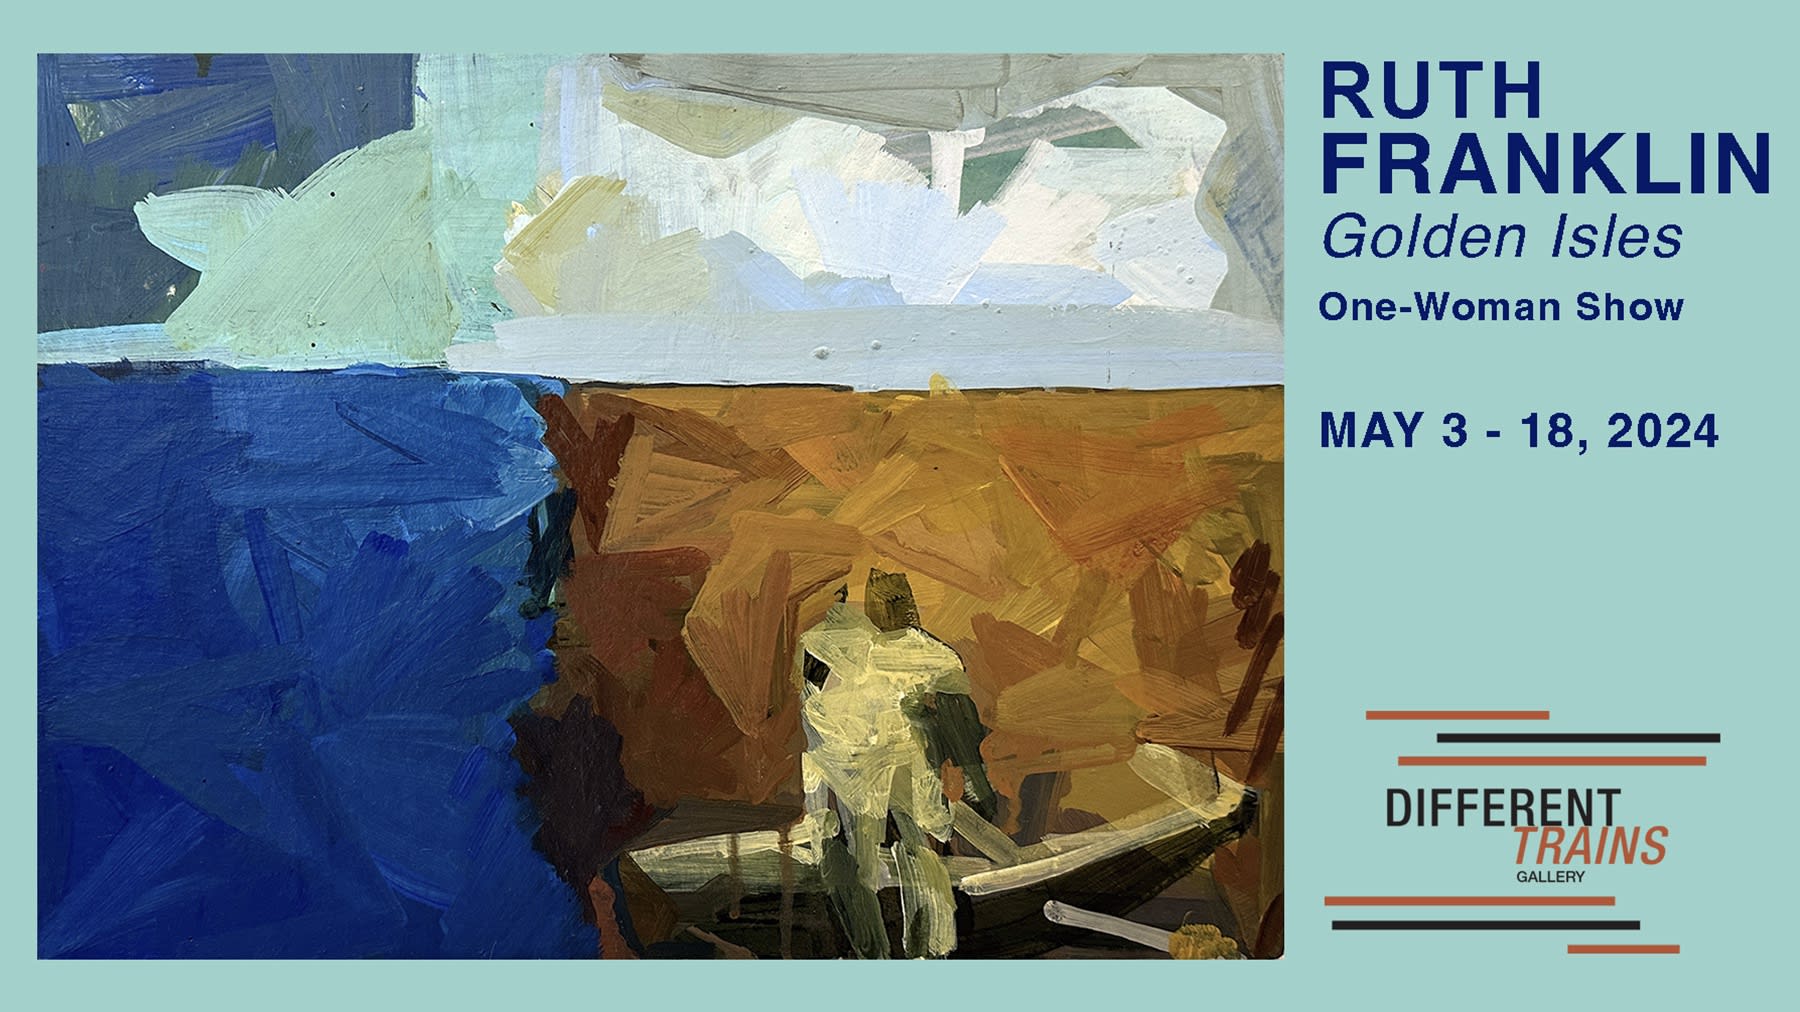 Ruth Franklin, Golden Isles, One-Woman Show of paintings at Different Trains Gallery